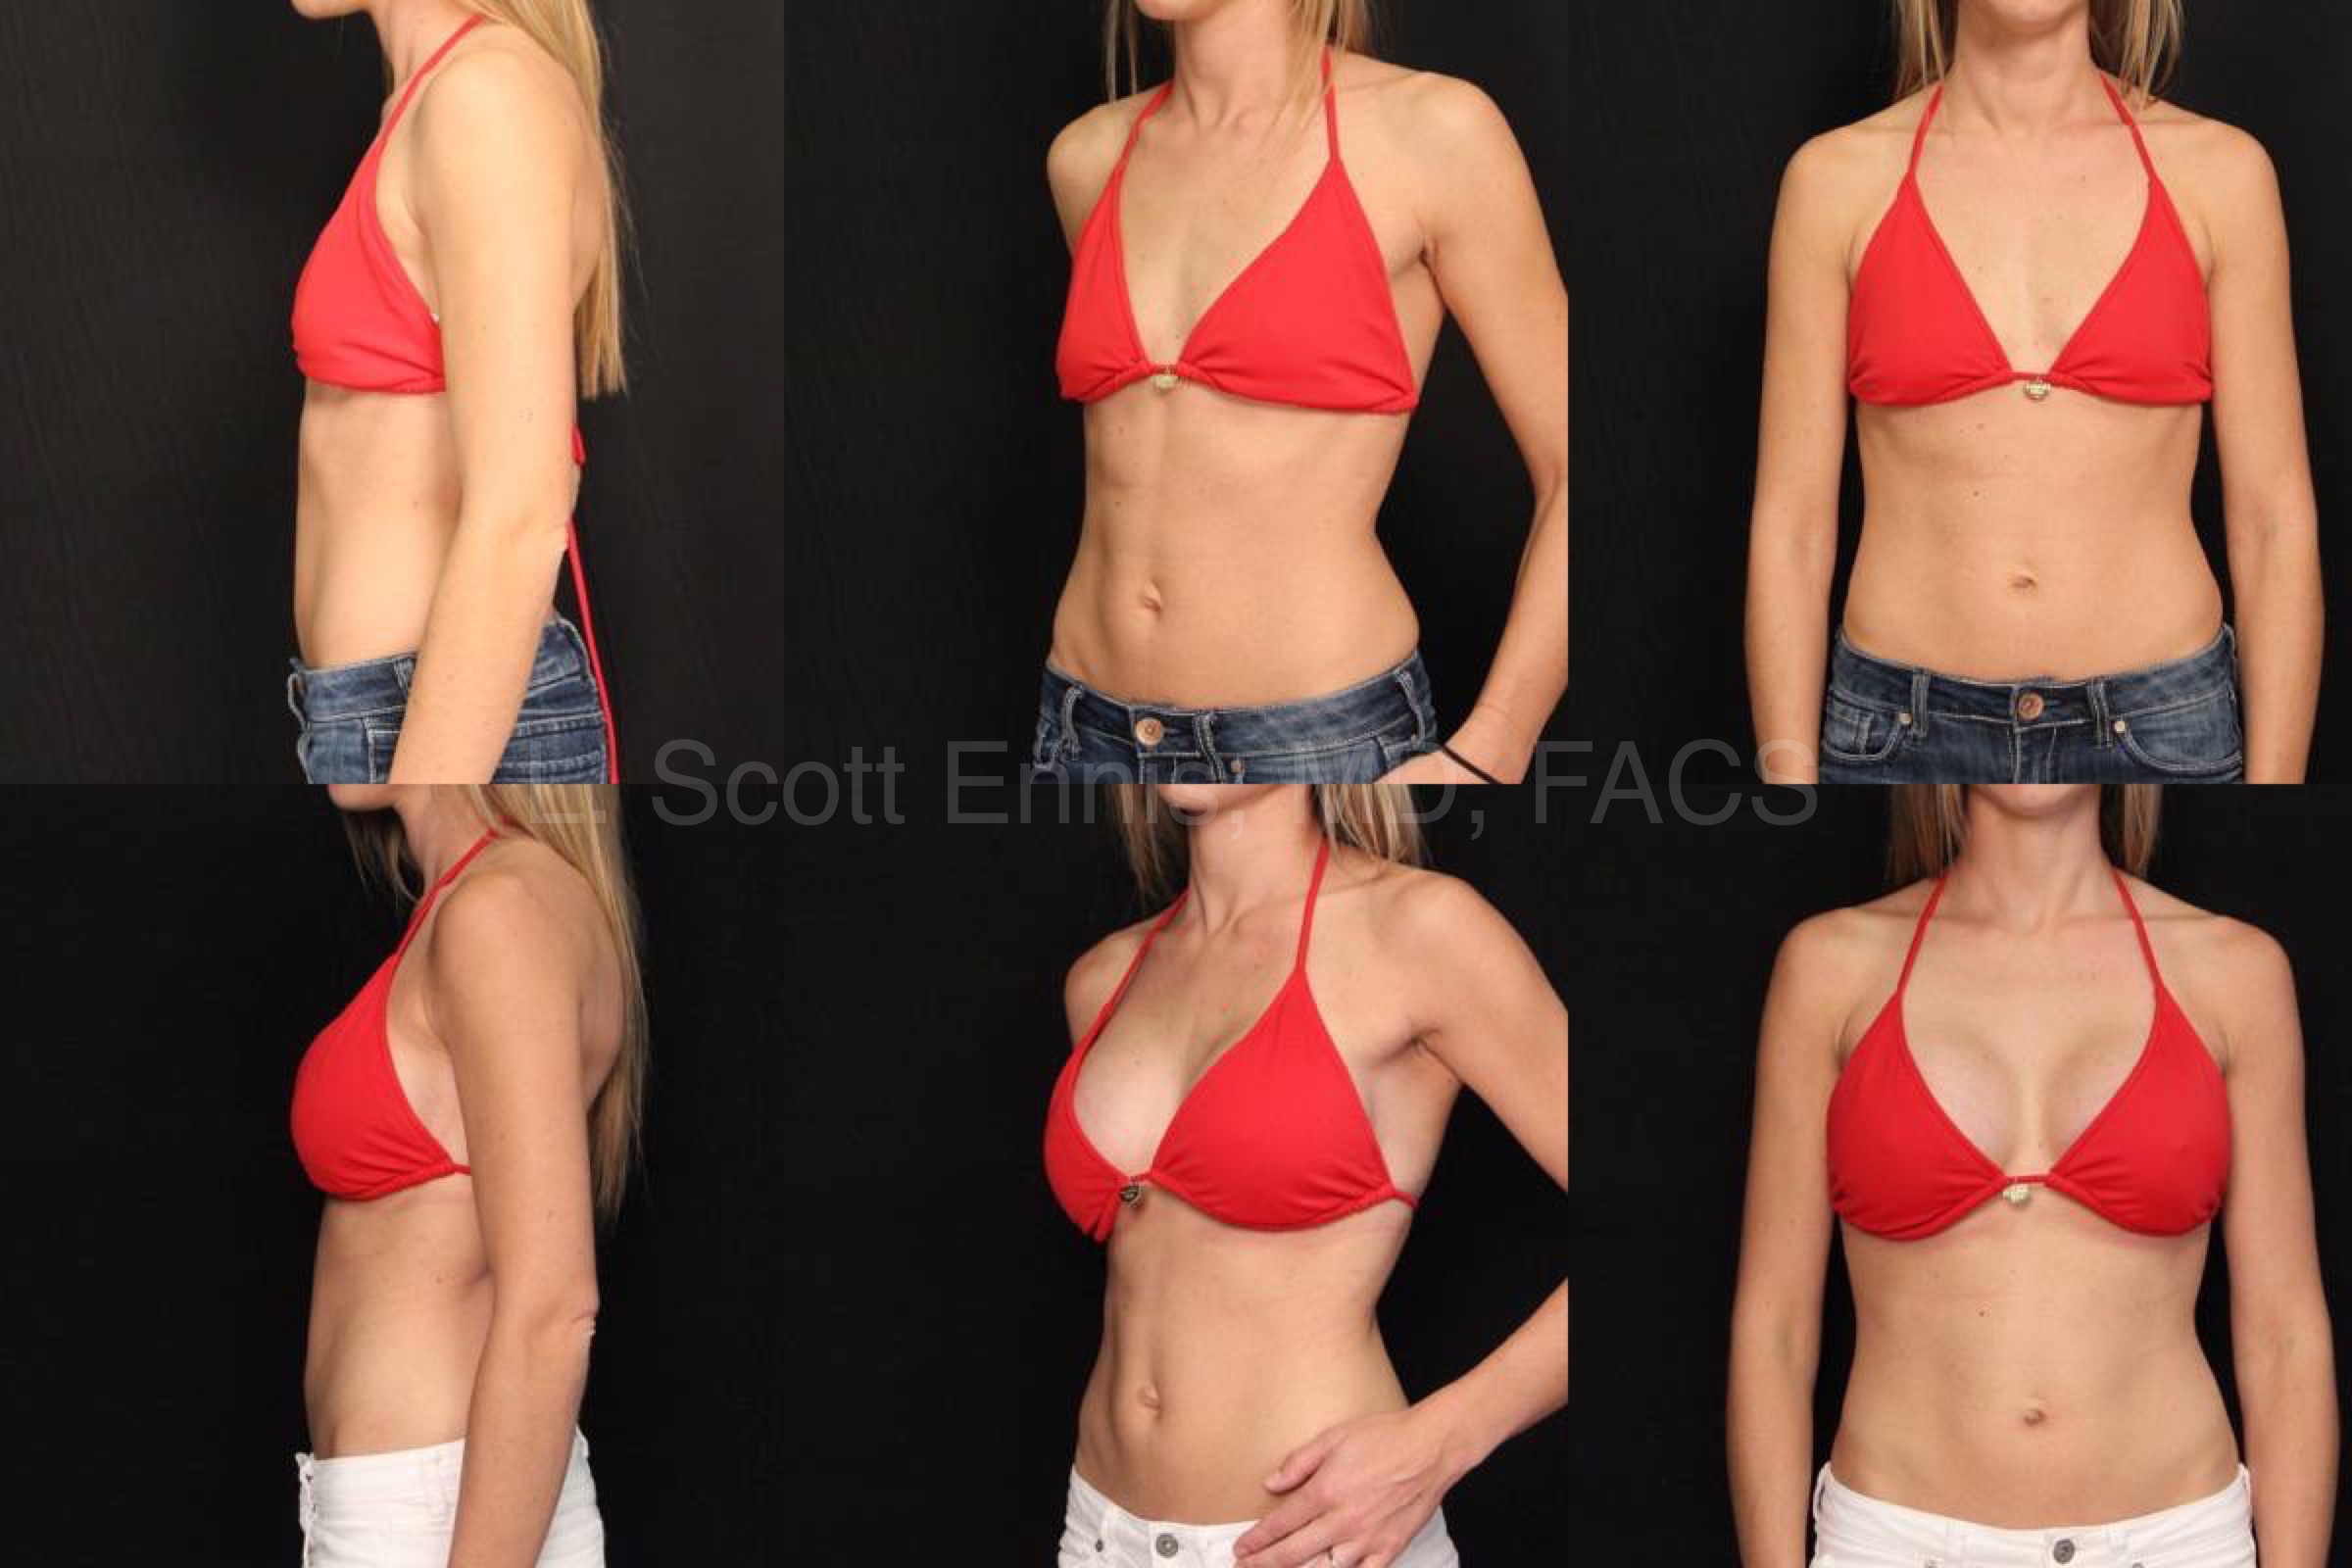 Before and After transaxillary breast augmentation Ennis Plastic Surgery Palm Beach Boca Raton Destin Miami Fort Lauderdale Florida